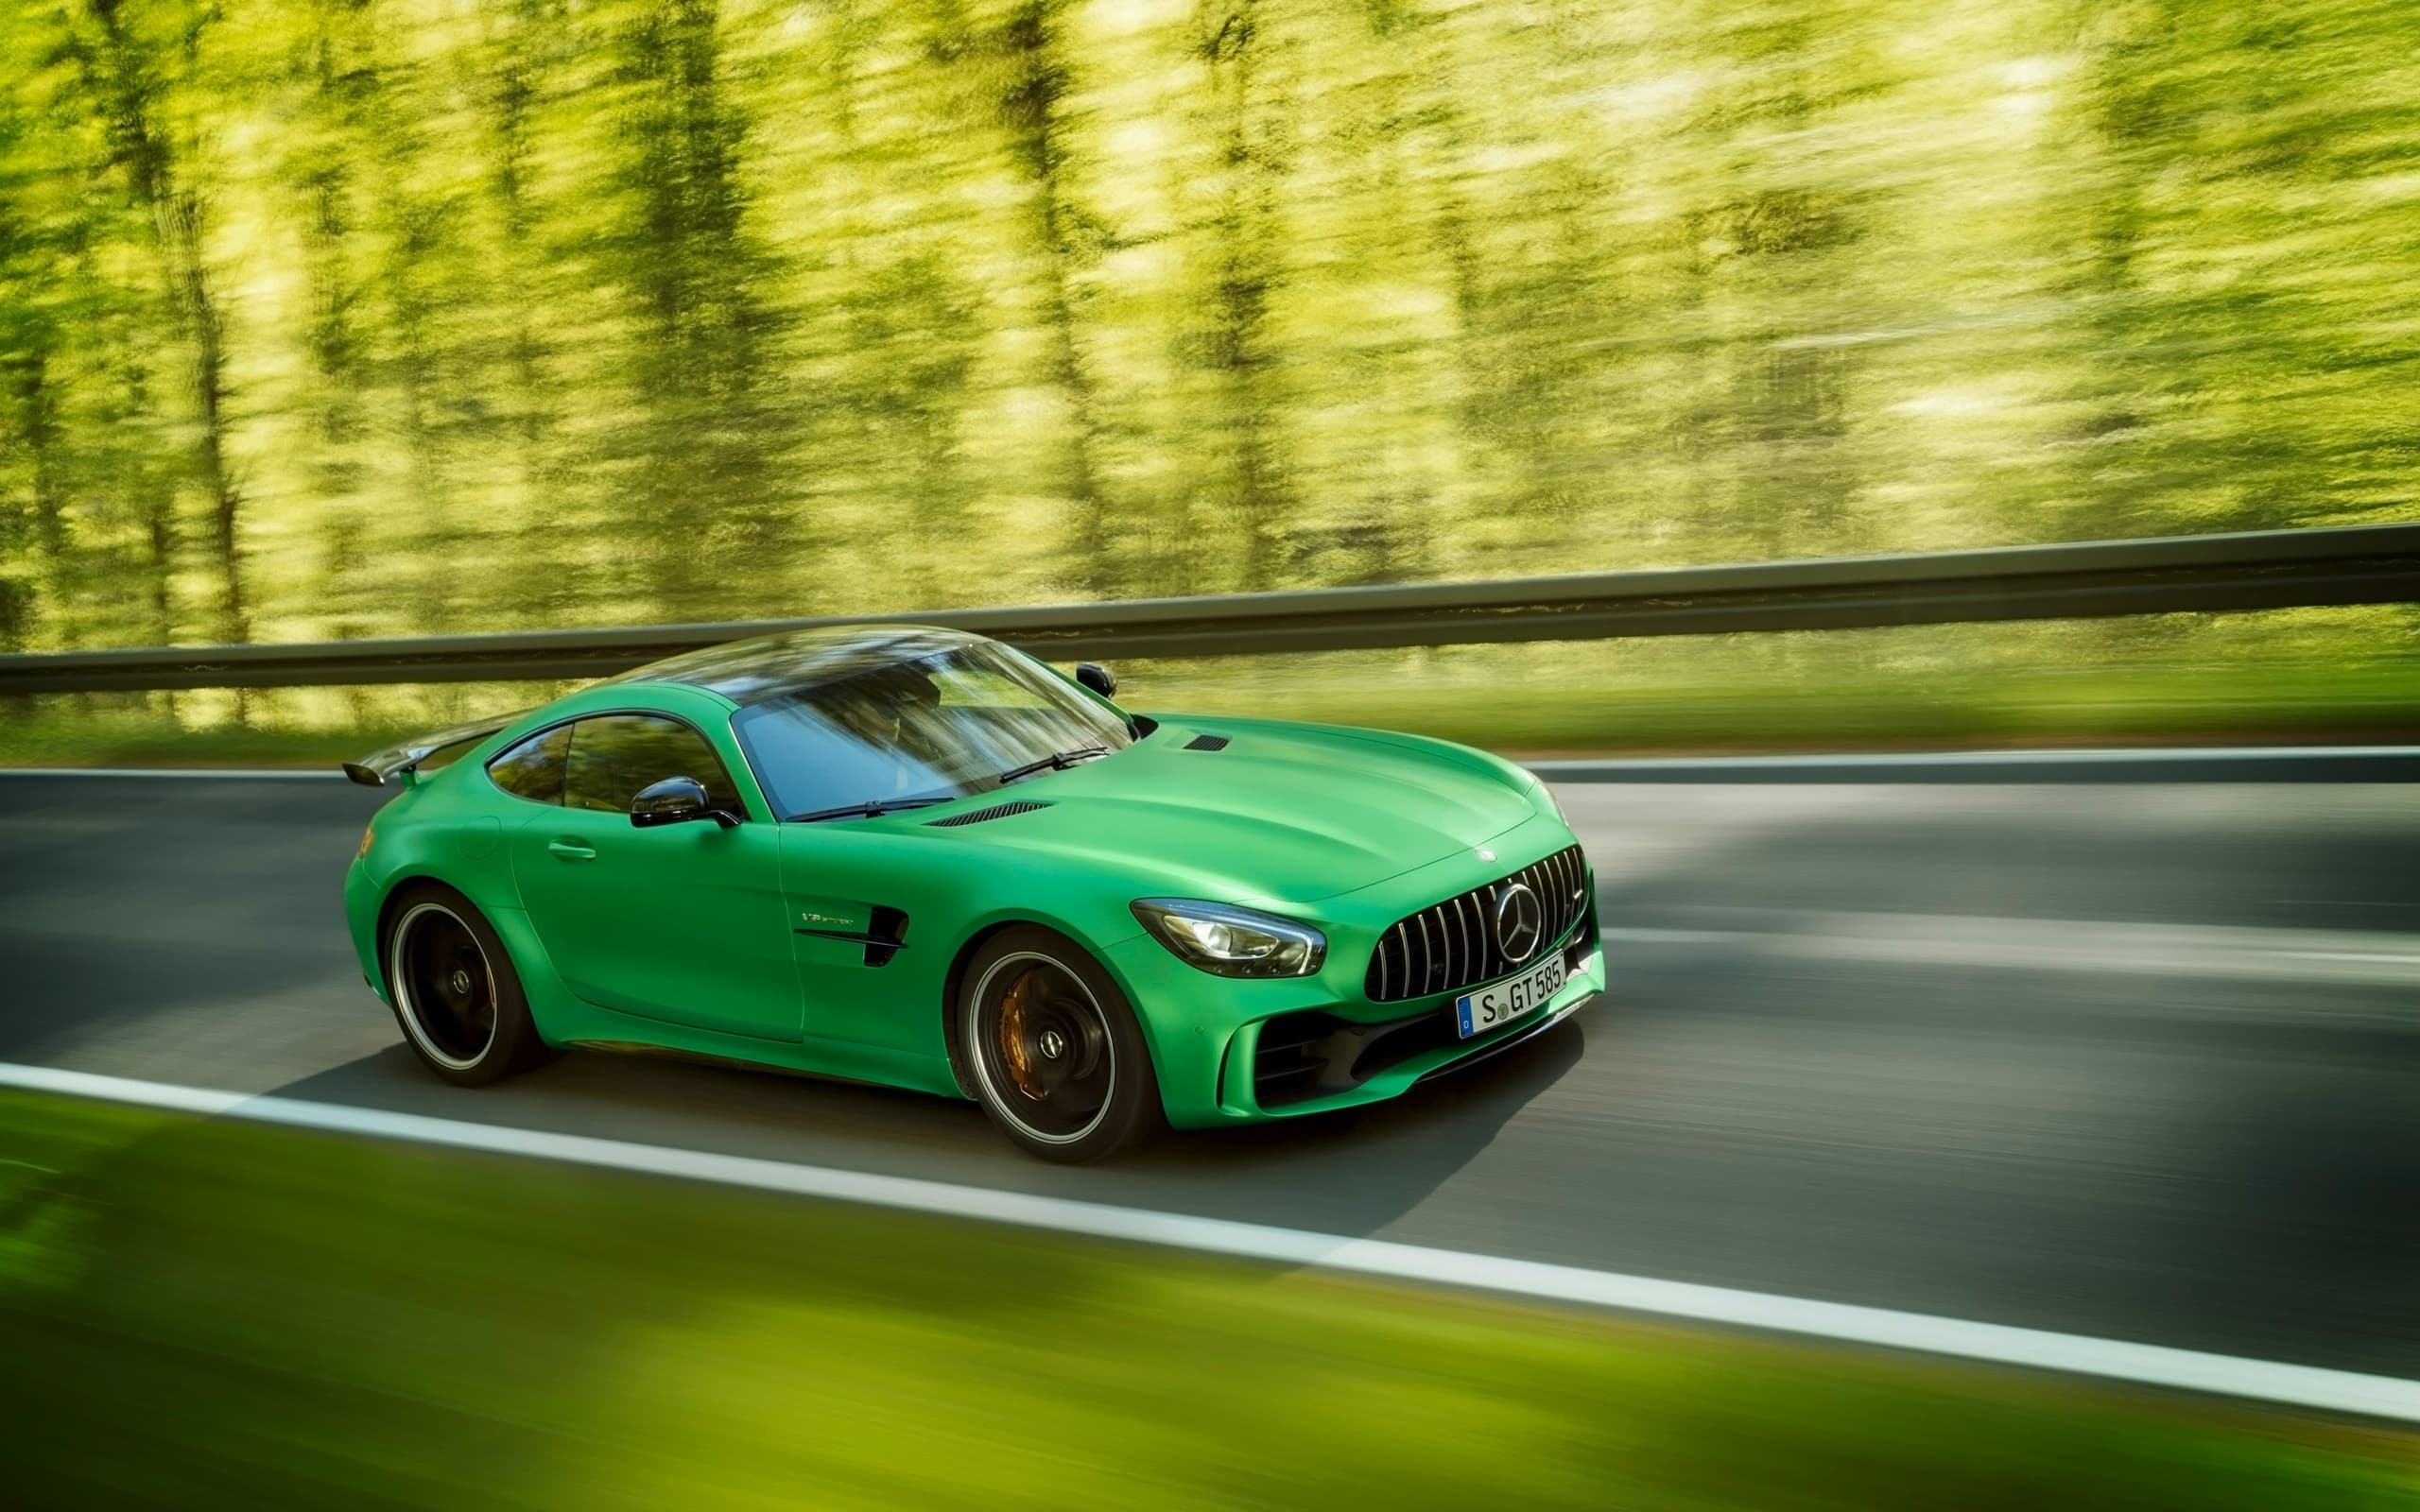 Mercedes AMG GT R 2017 wallpapers HD High Quality and